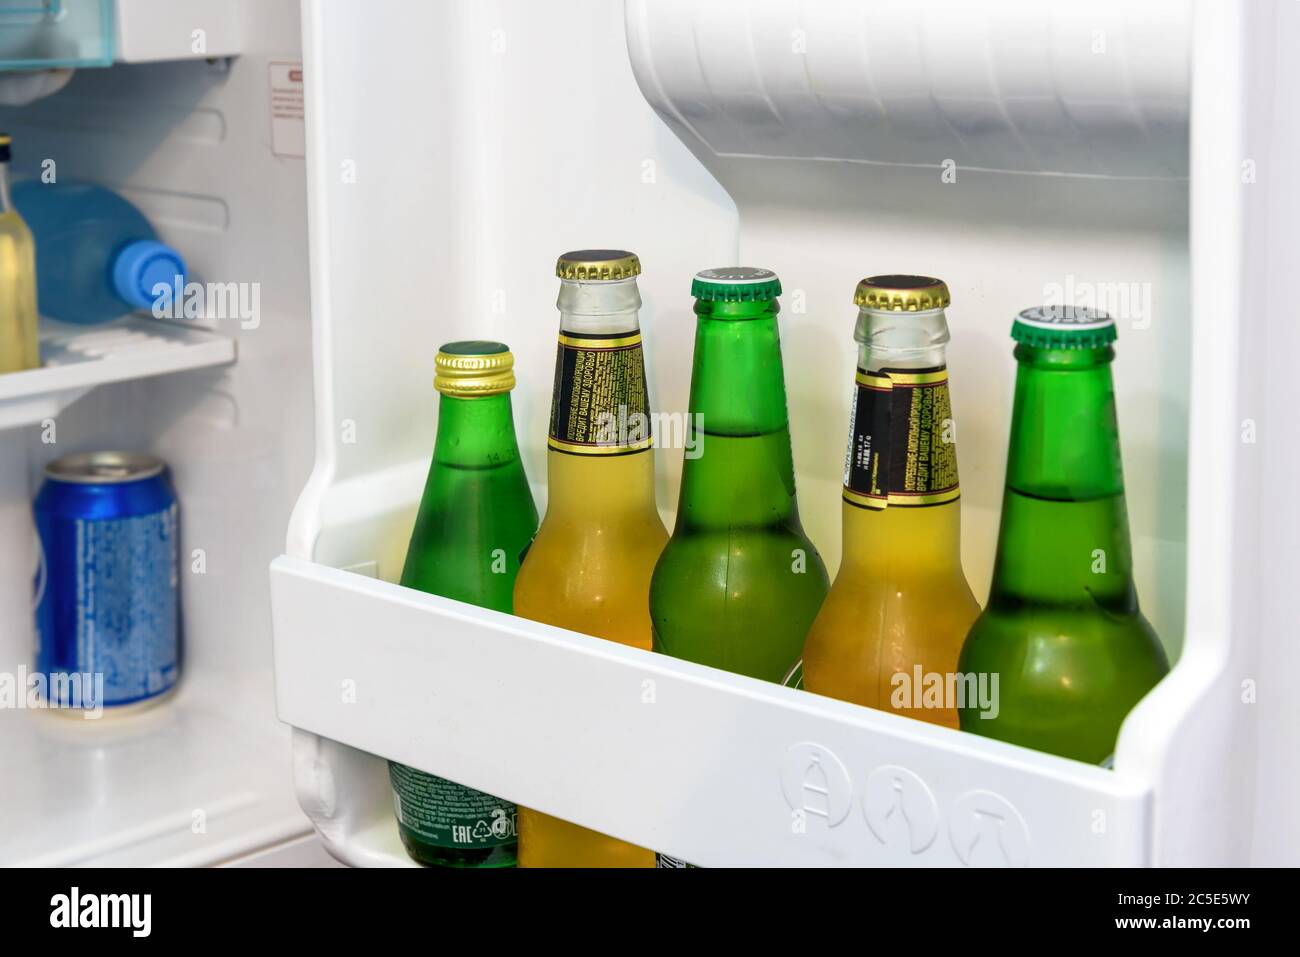 https://c8.alamy.com/comp/2C5E5WY/mini-fridge-full-of-bottles-of-beer-and-water-in-a-hotel-room-2C5E5WY.jpg